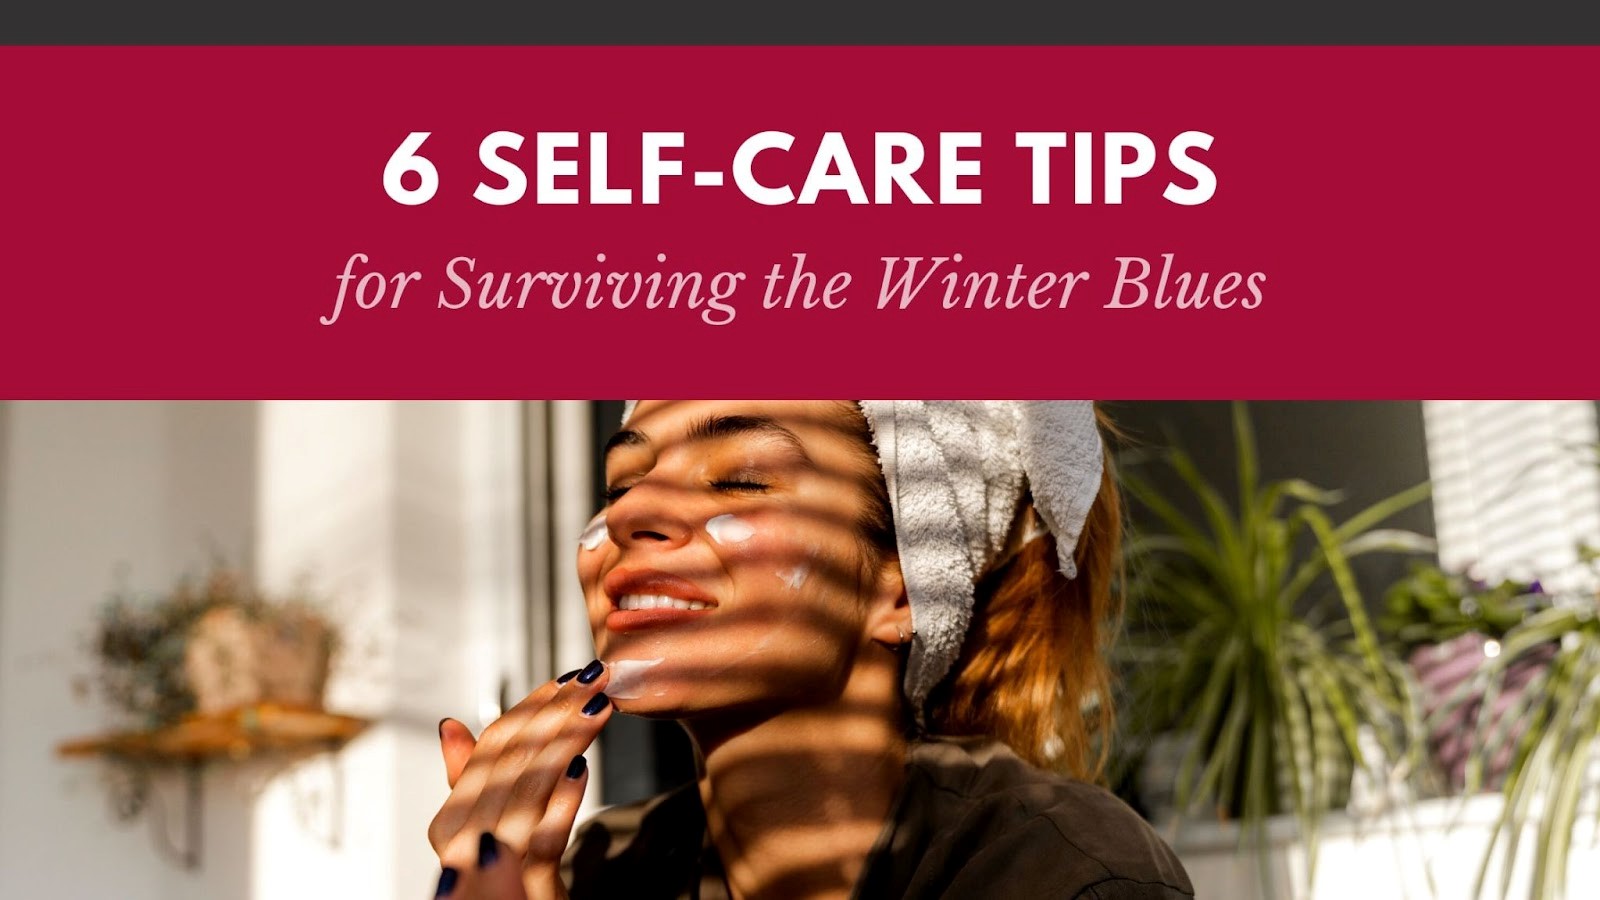 6 Self-Care Tips for Surviving the Winter Blues